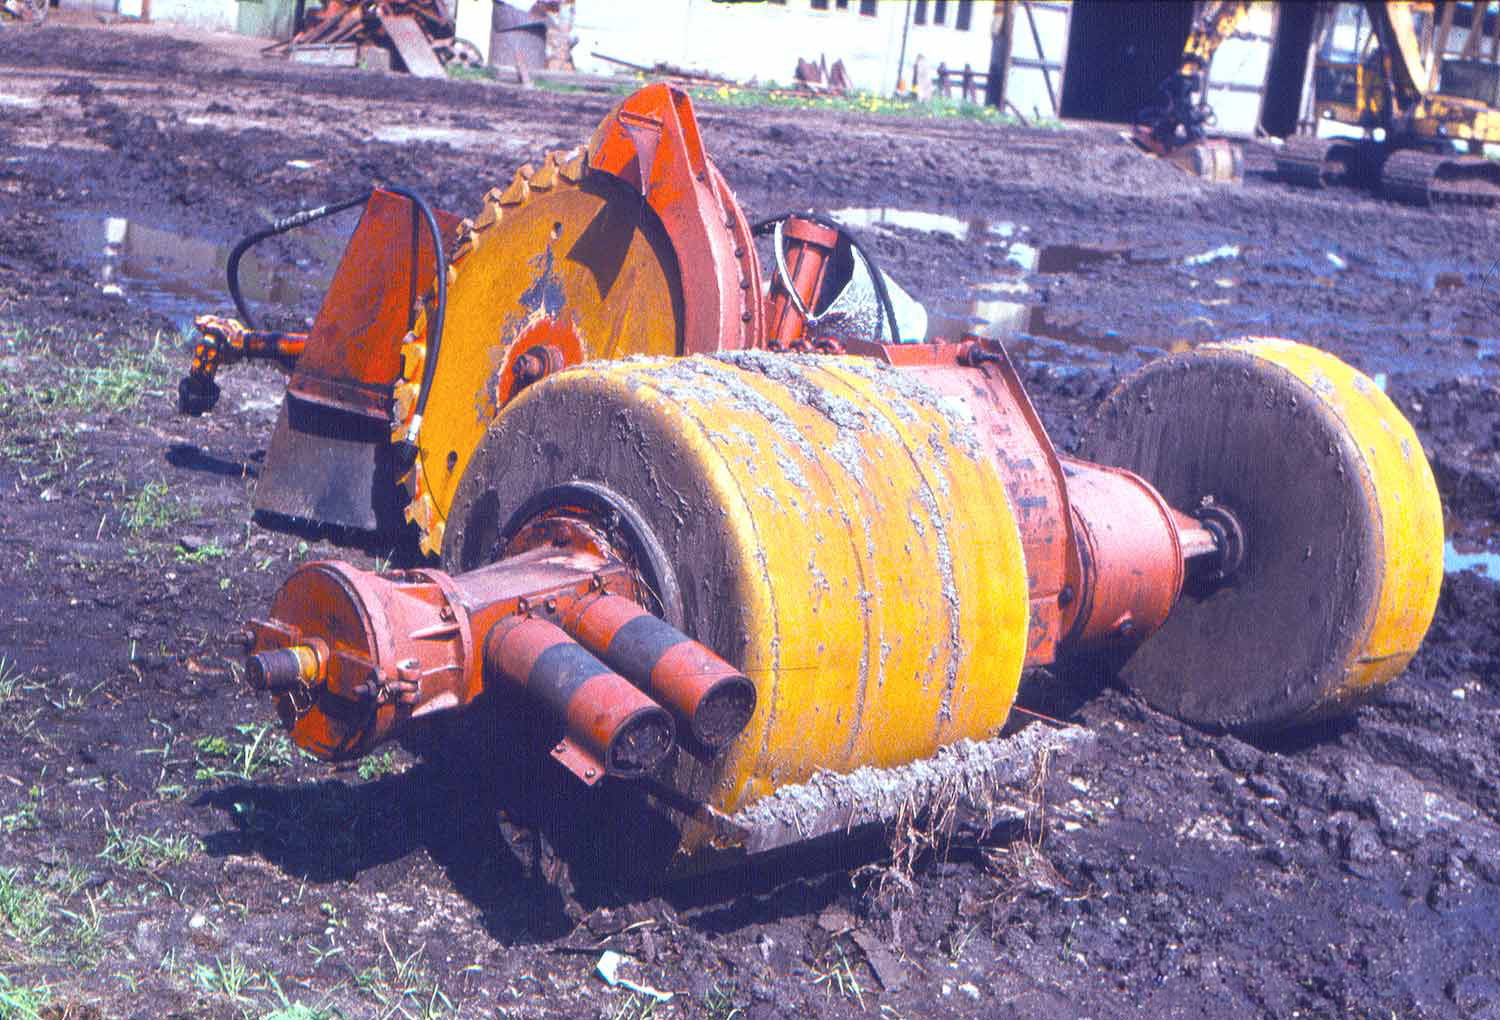 https://commons.wikimedia.org/wiki/Category:Peat_cutting_machines_in_Germany_(low_quality)